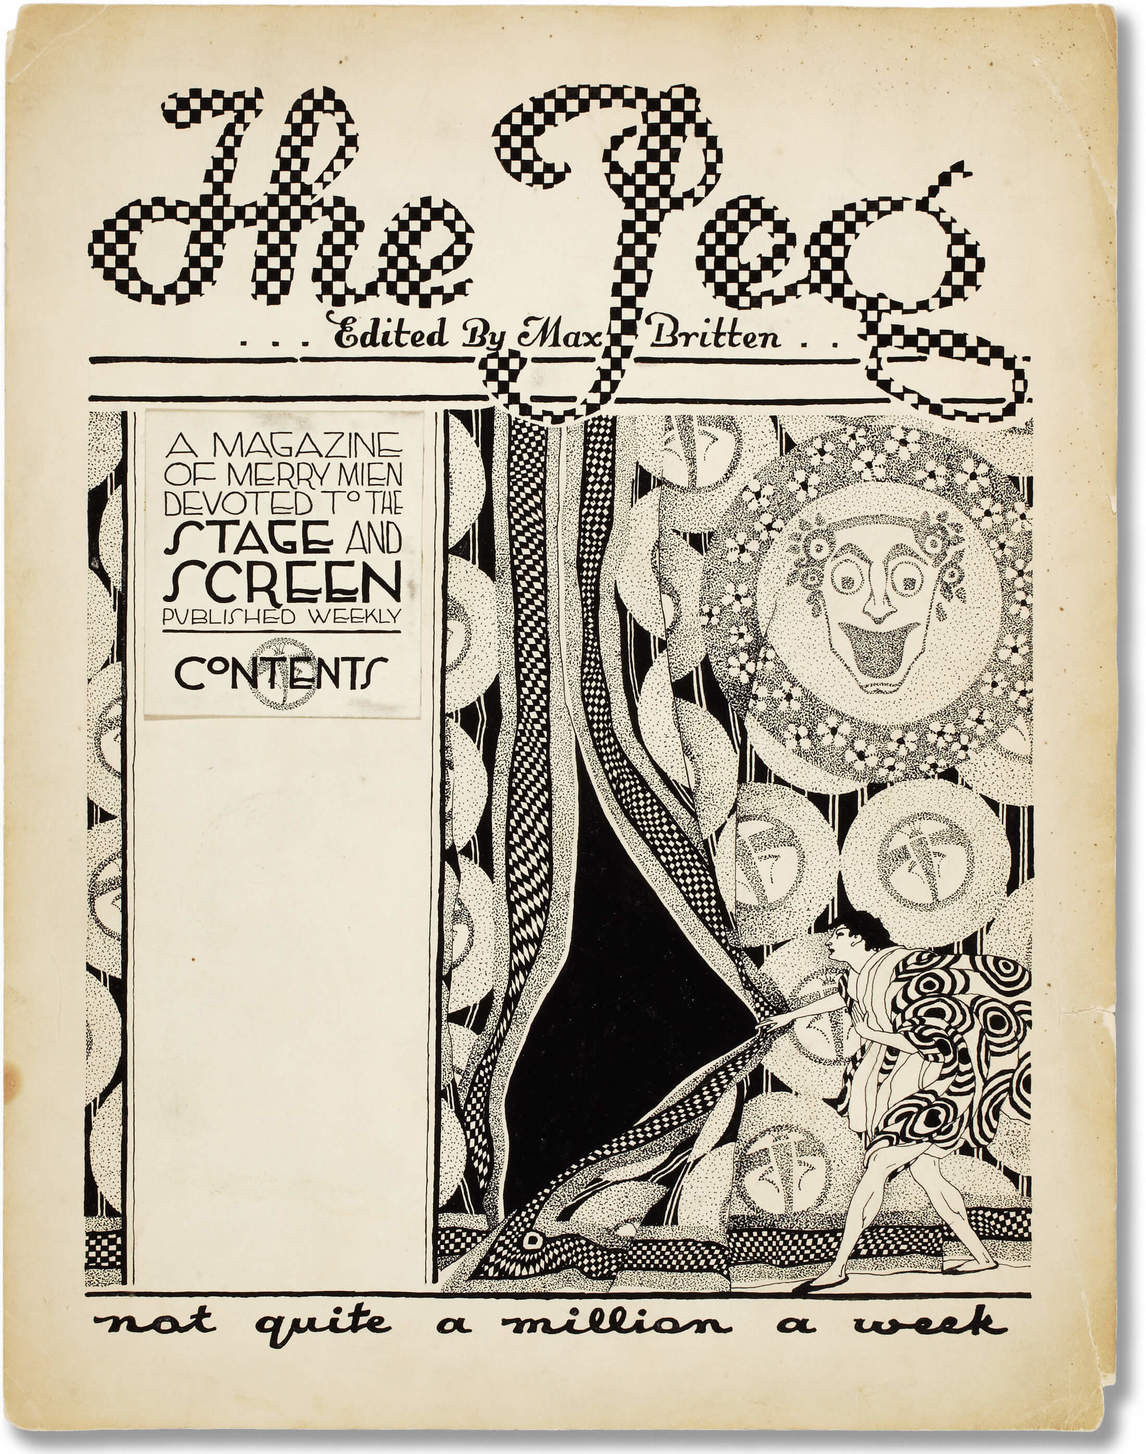 Bertram Brooker, page couverture de The Peg: A Magazine of Merry Mien Devoted to the Stage and Screen, v.1915-1921